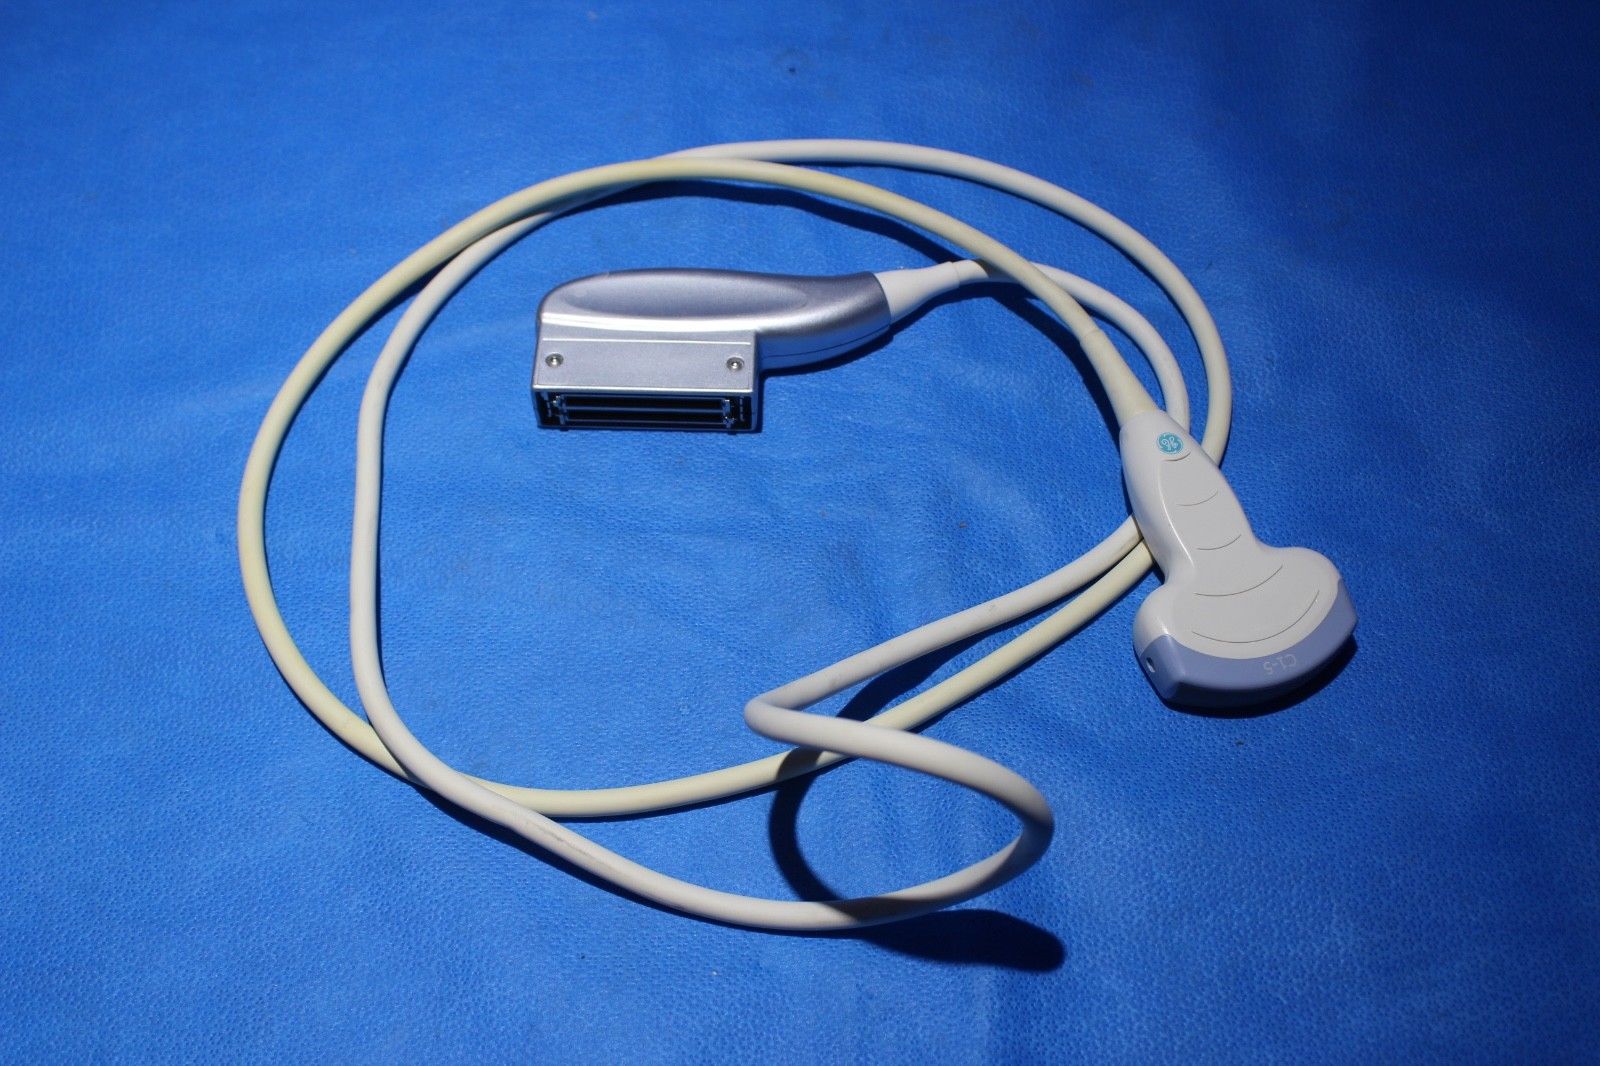 a cord connected to aprobe on a blue surface